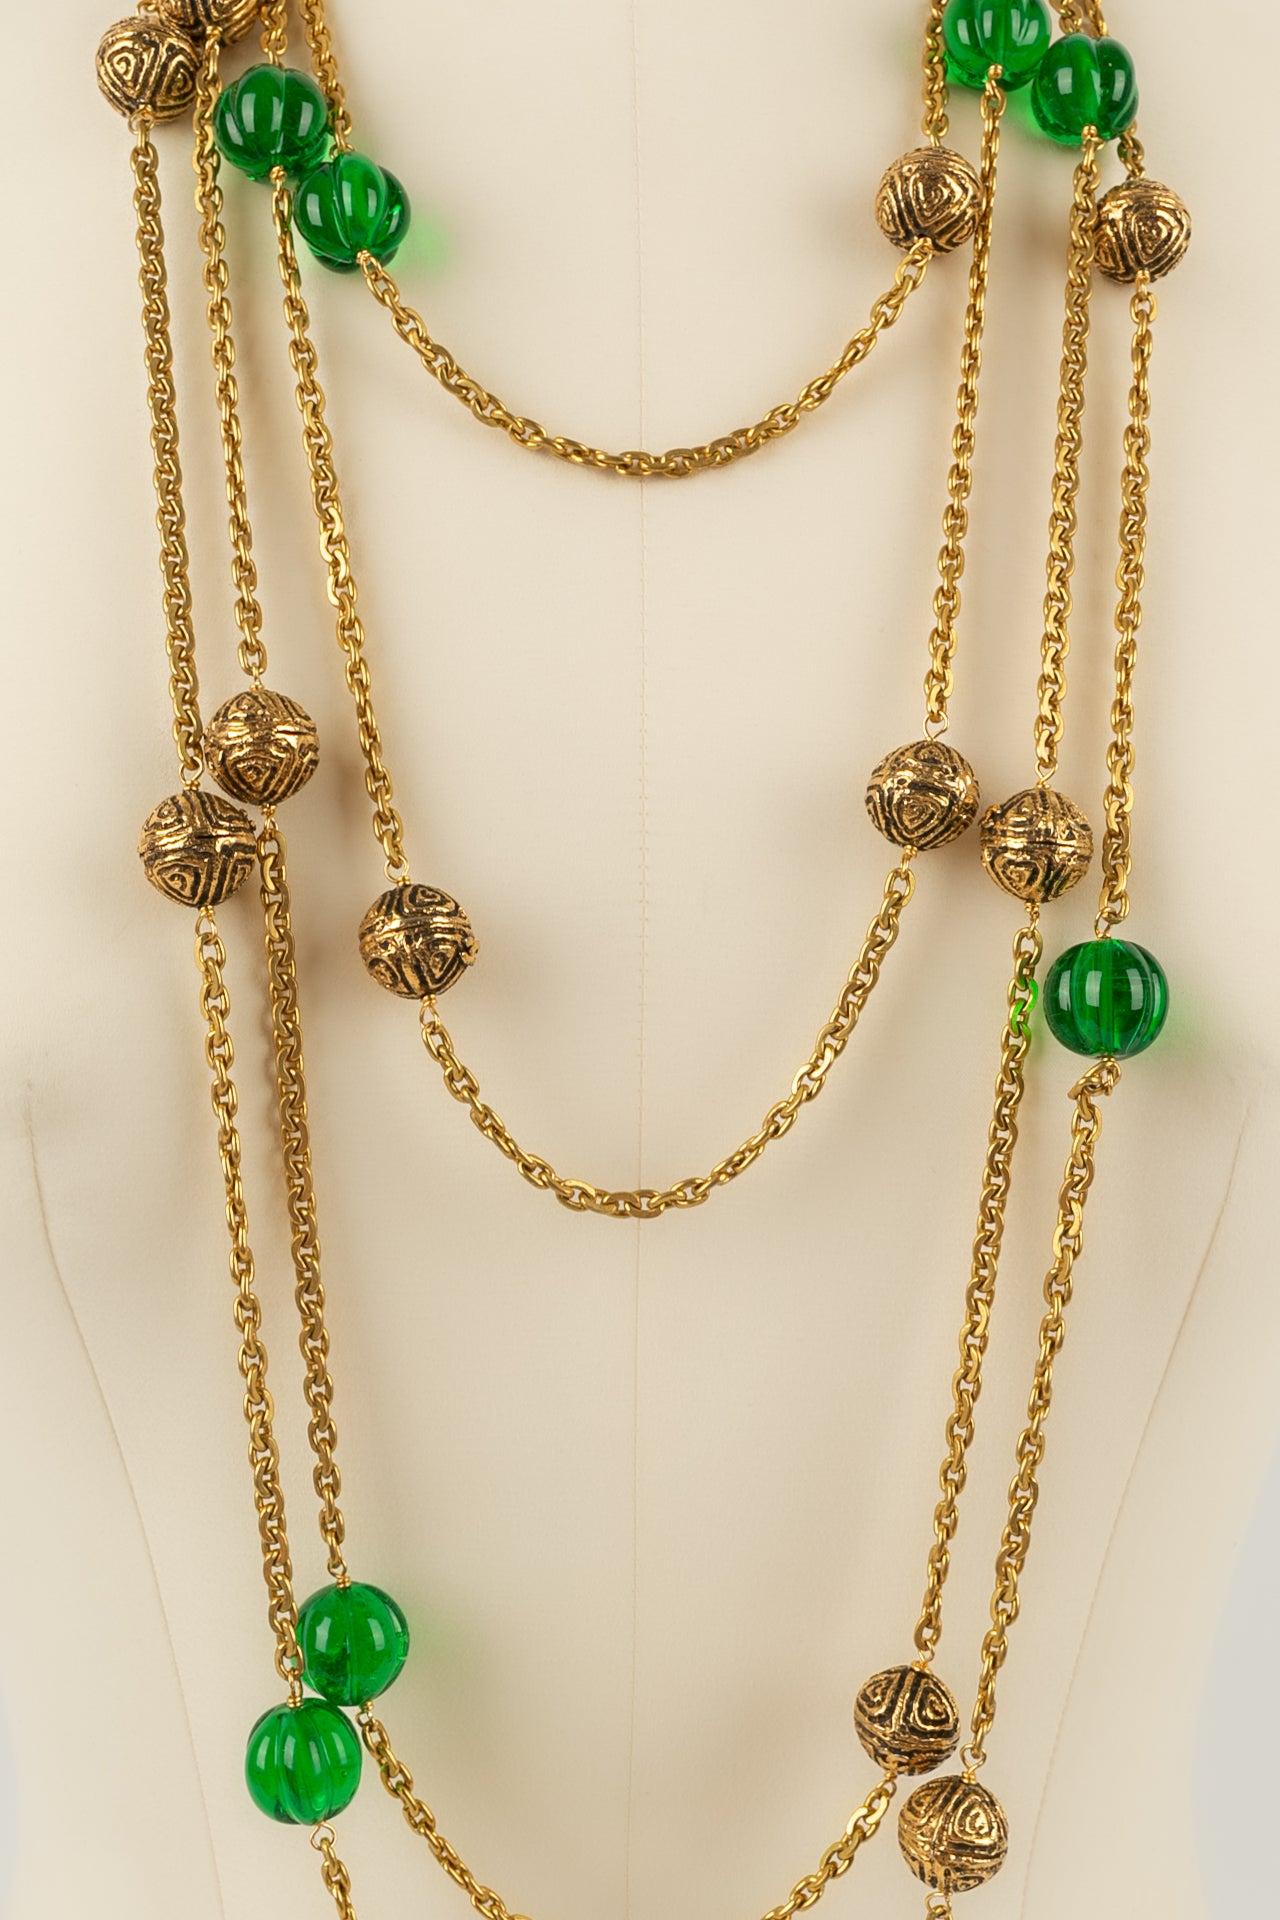 Women's Chanel Long Necklace in Gold Metal and Glass Beads For Sale